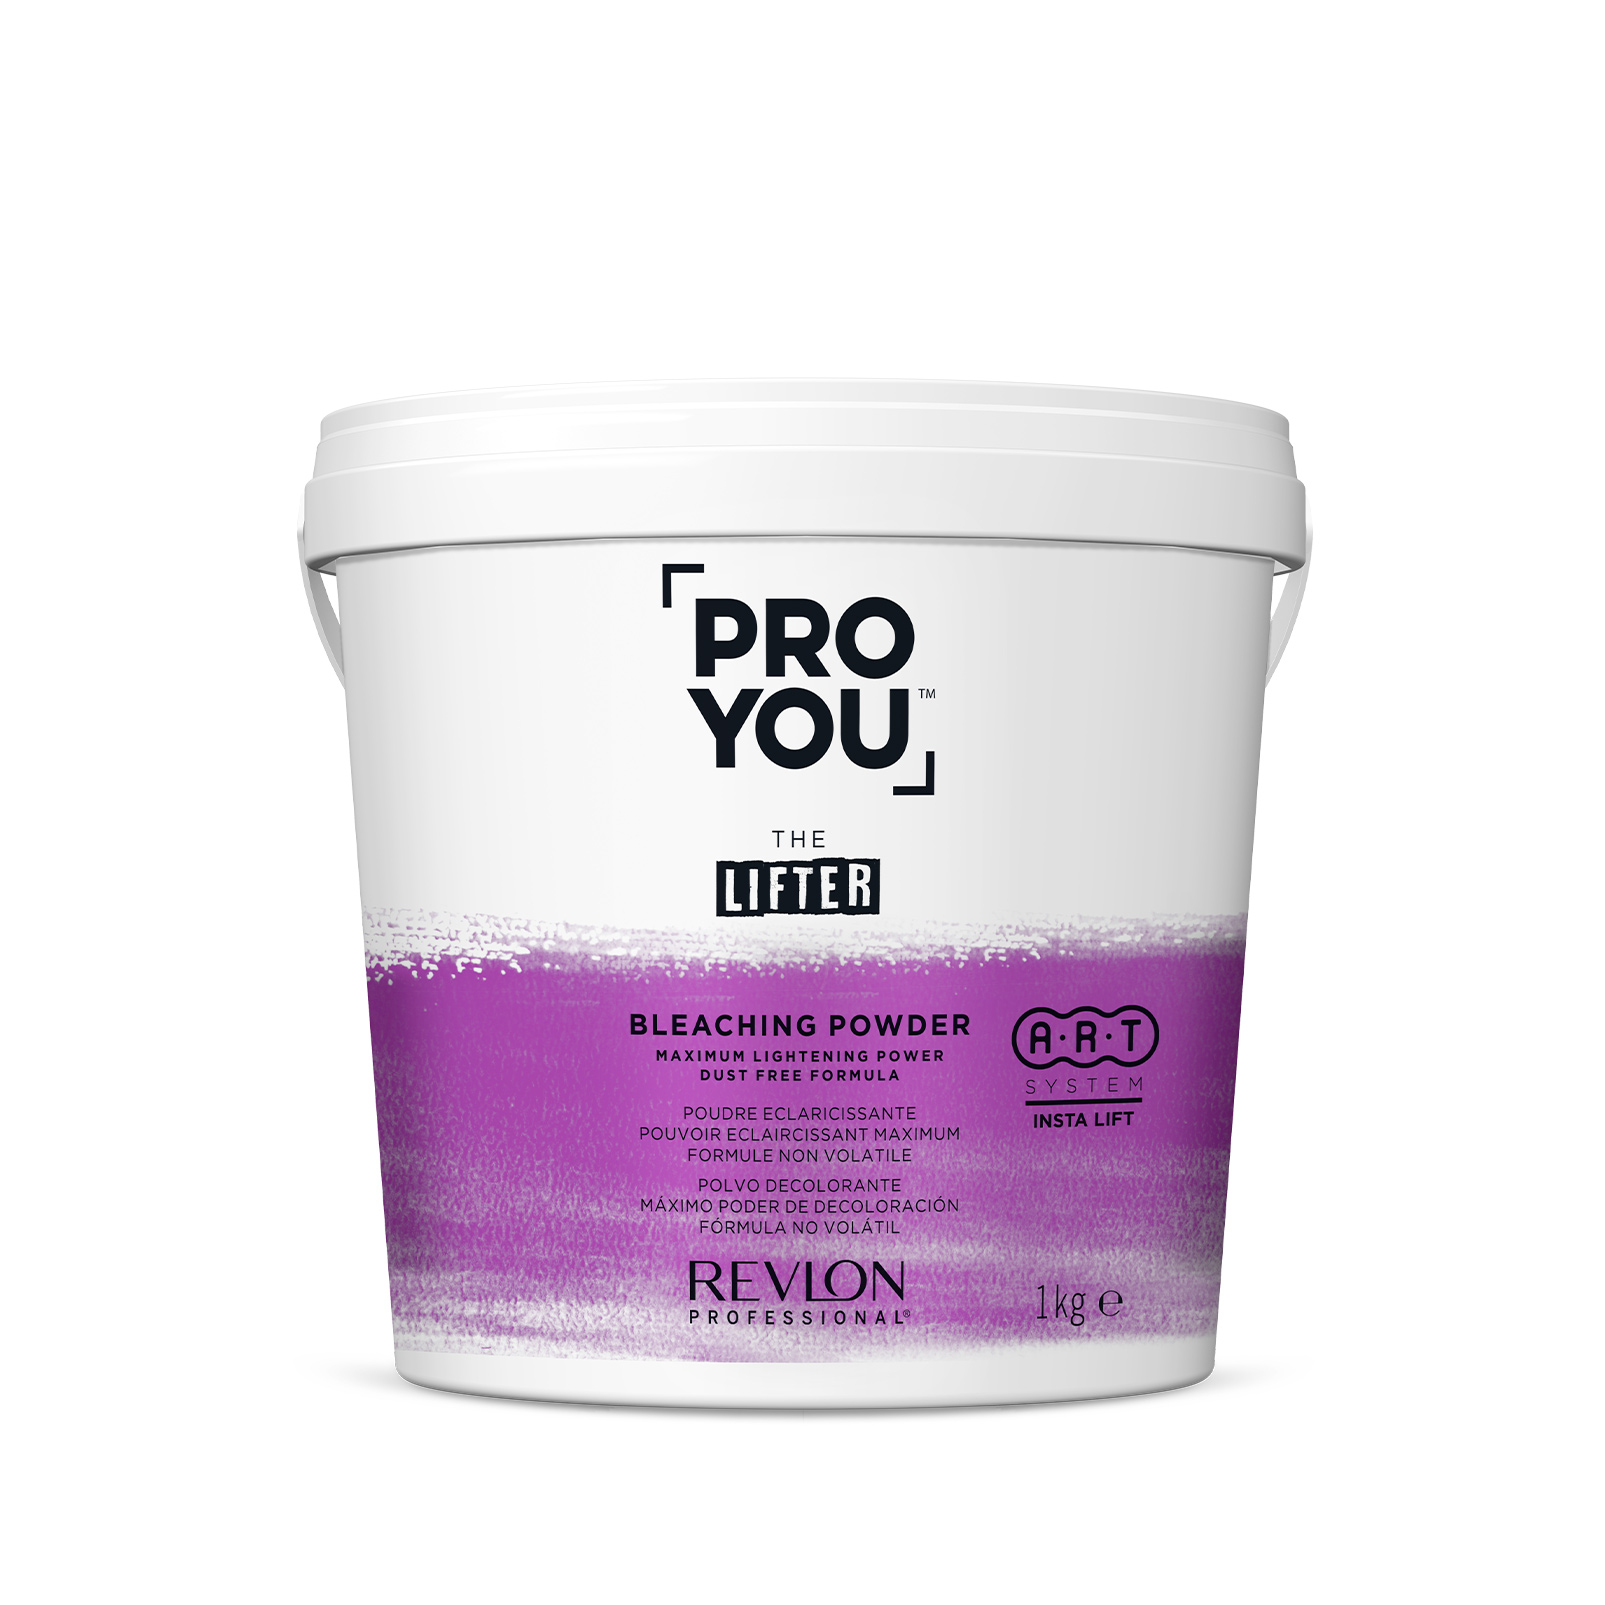 Pro You Color The Lifter Bleaching Powder